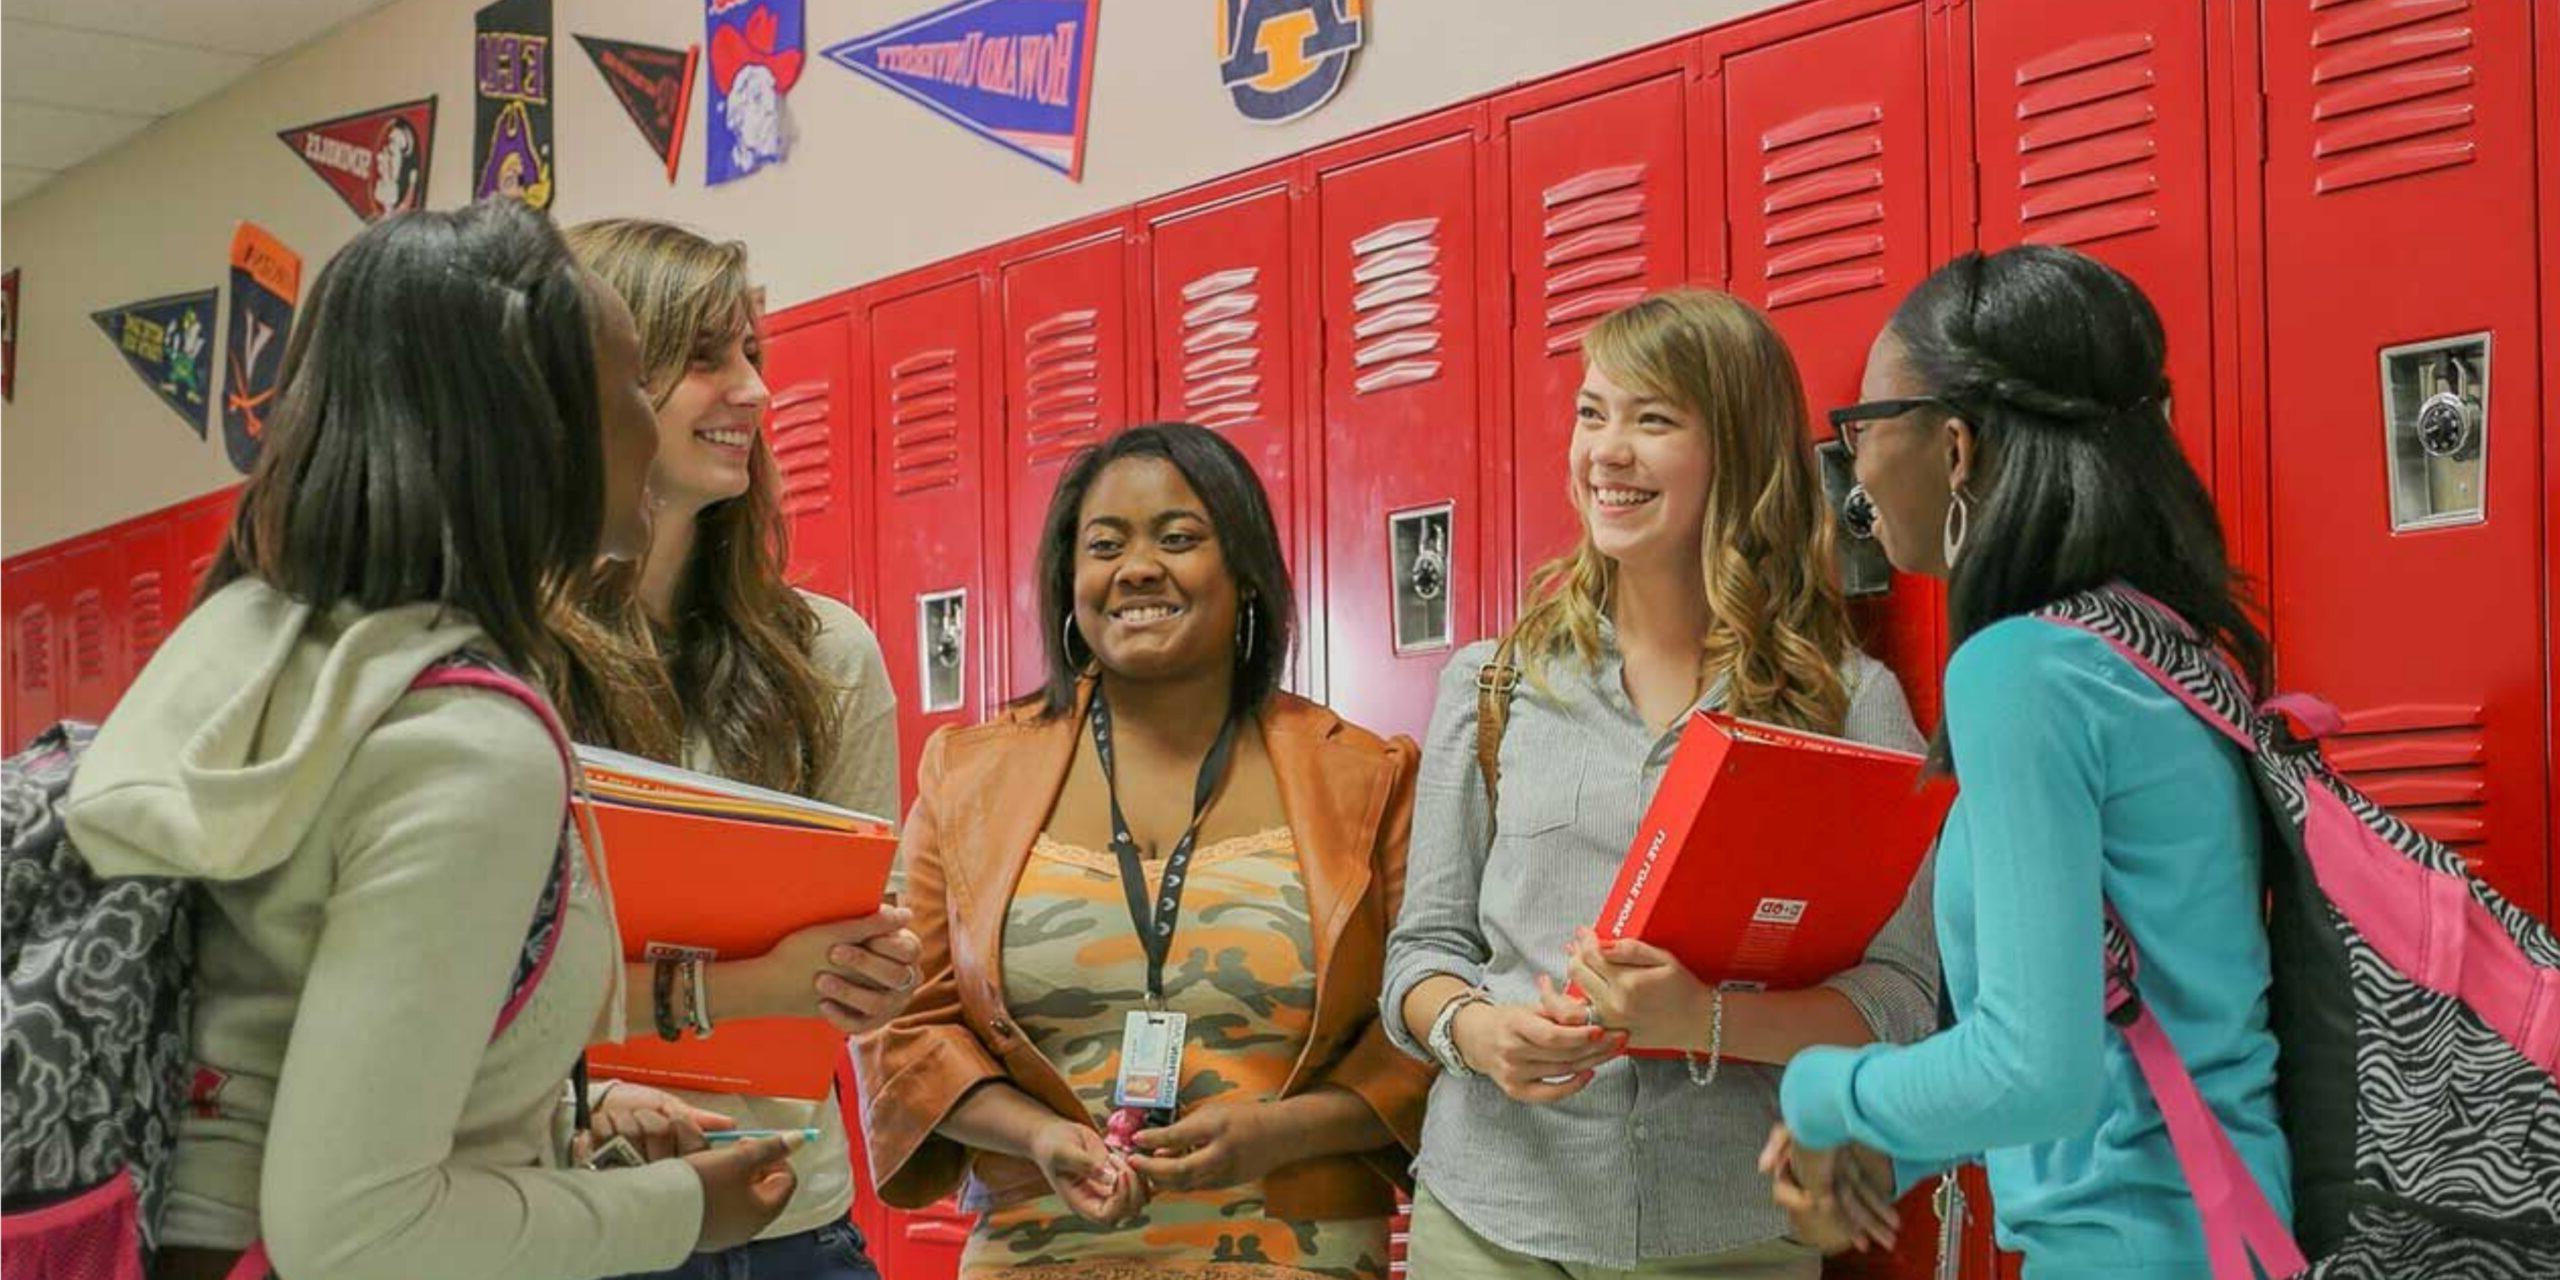 high school students chatting in the hall in front of red lockers